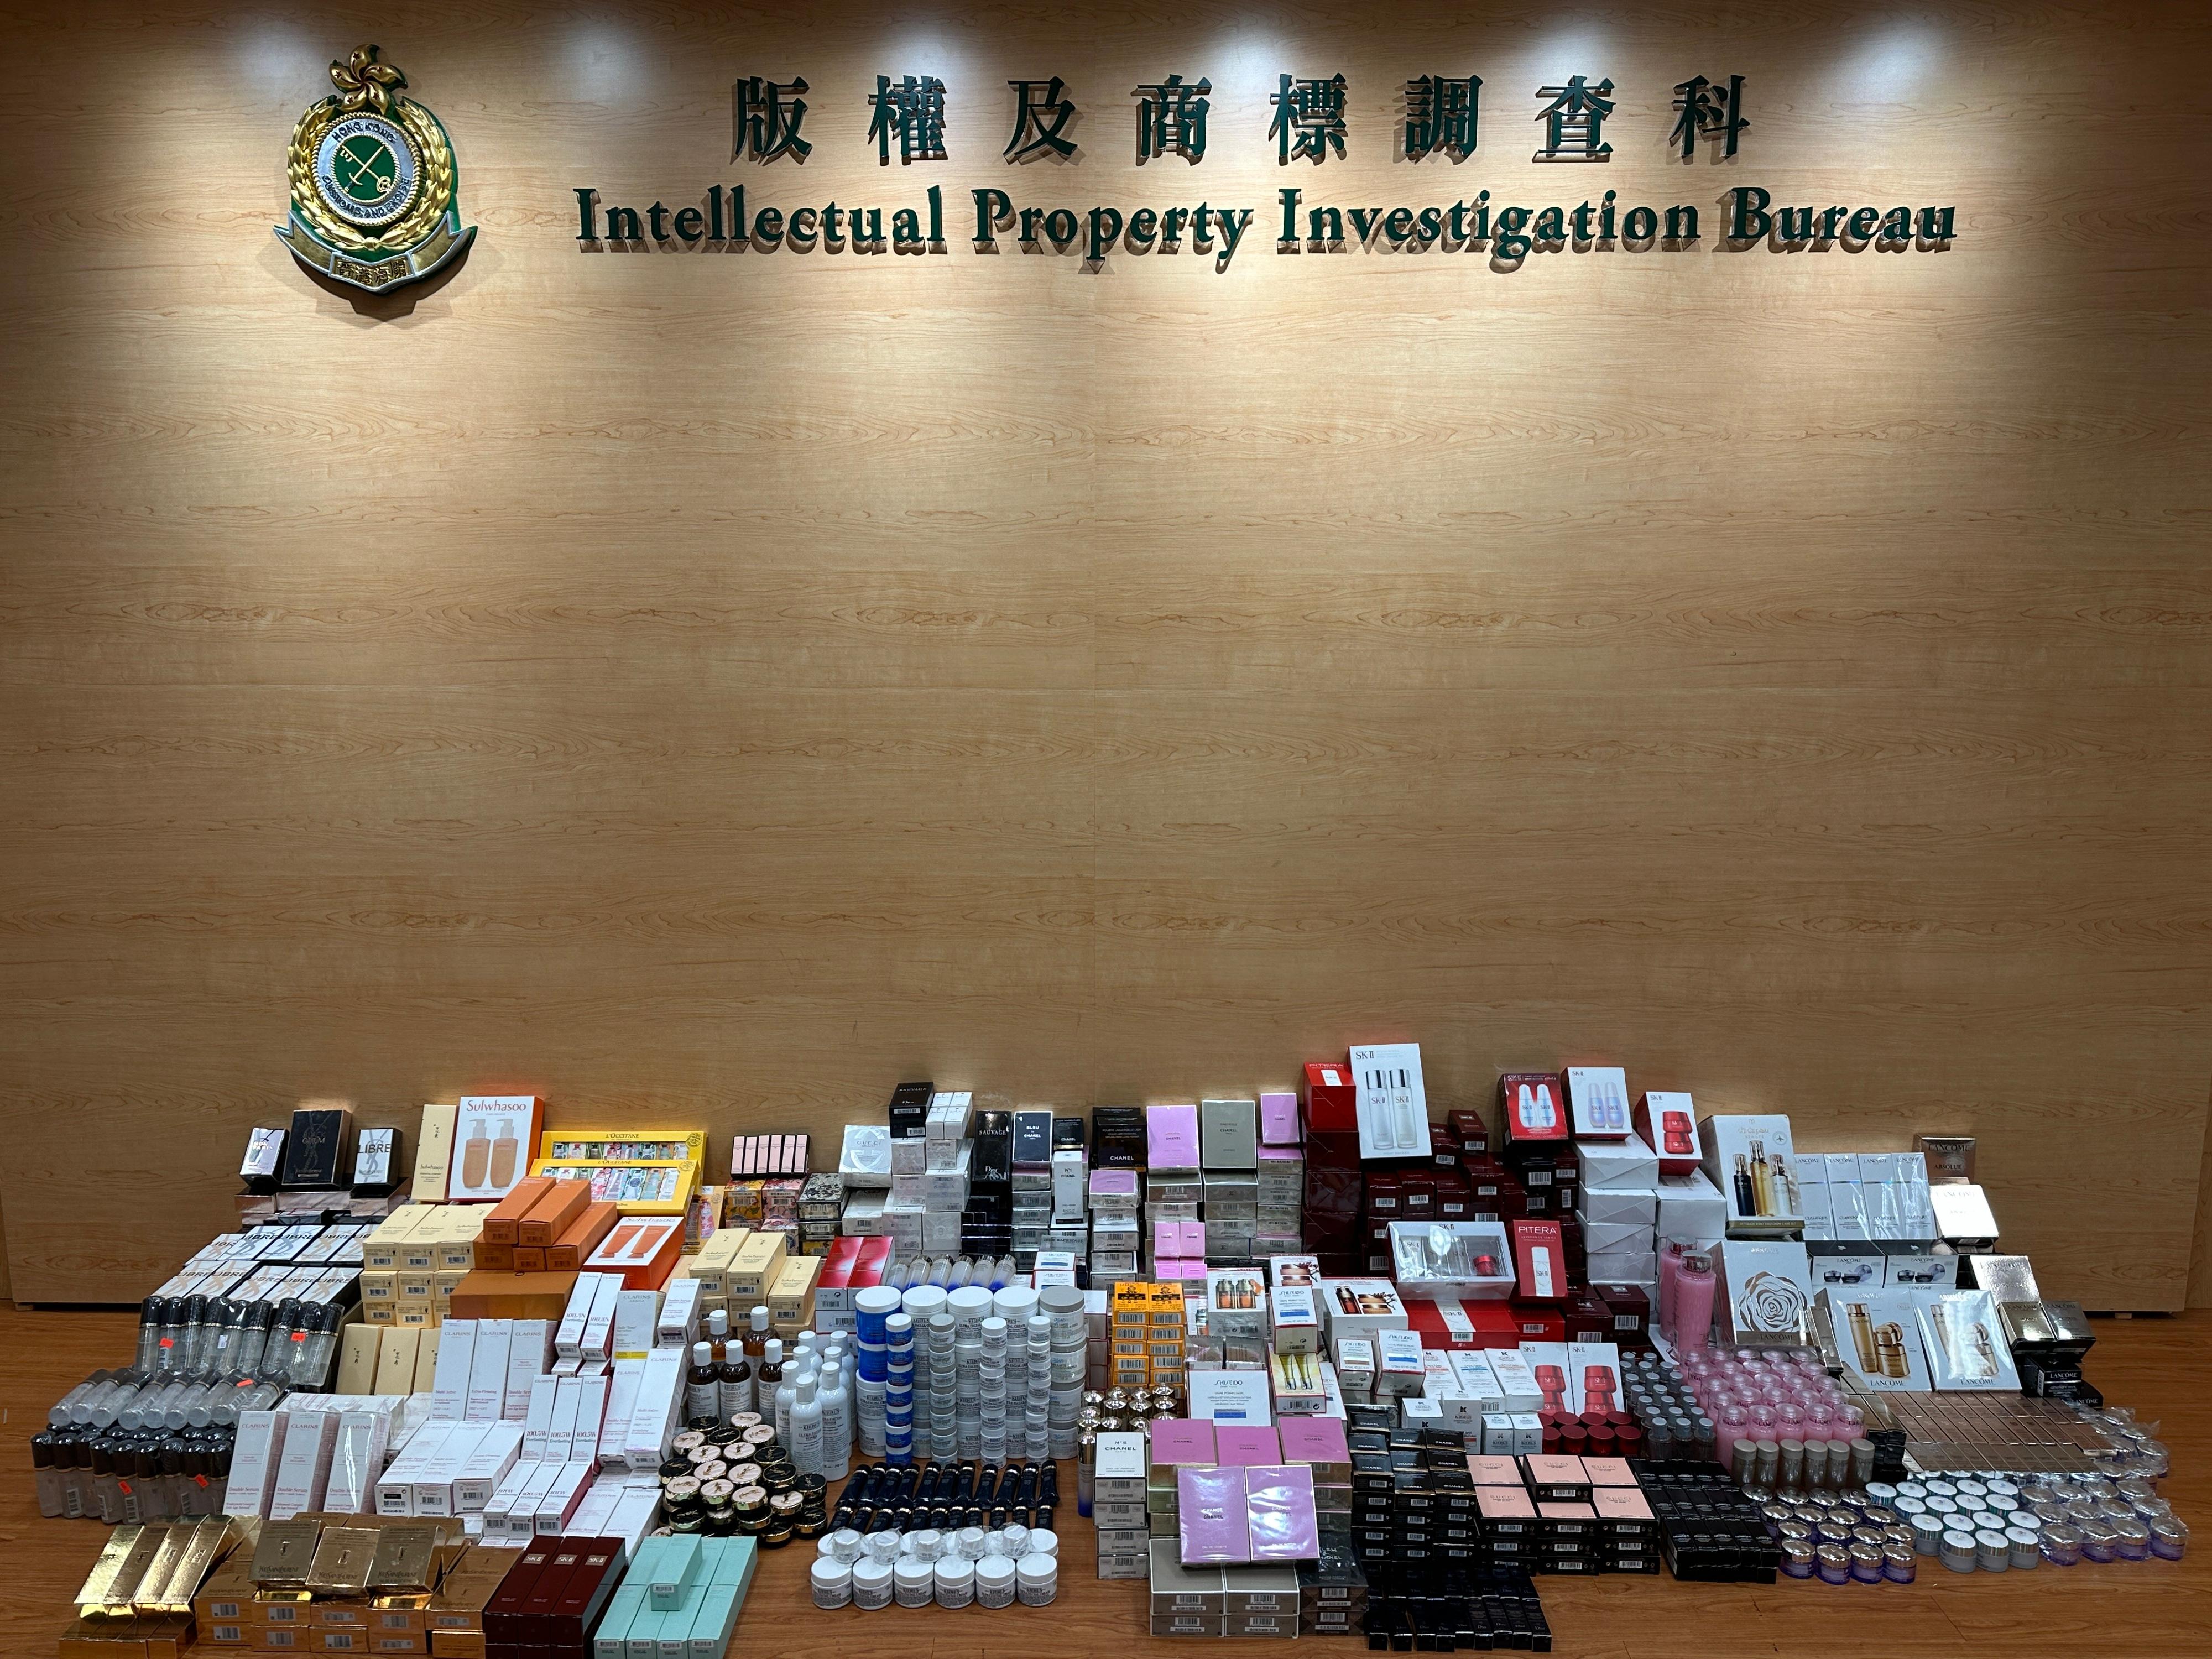 Hong Kong Customs yesterday (December 6) conducted a special operation in Sheung Shui to combat the sale of counterfeit goods and seized about 2 300 items of suspected counterfeit goods, including cosmetics, skincare products and perfumes, with an estimated market value of about $500,000. Photo shows the suspected counterfeit goods seized.